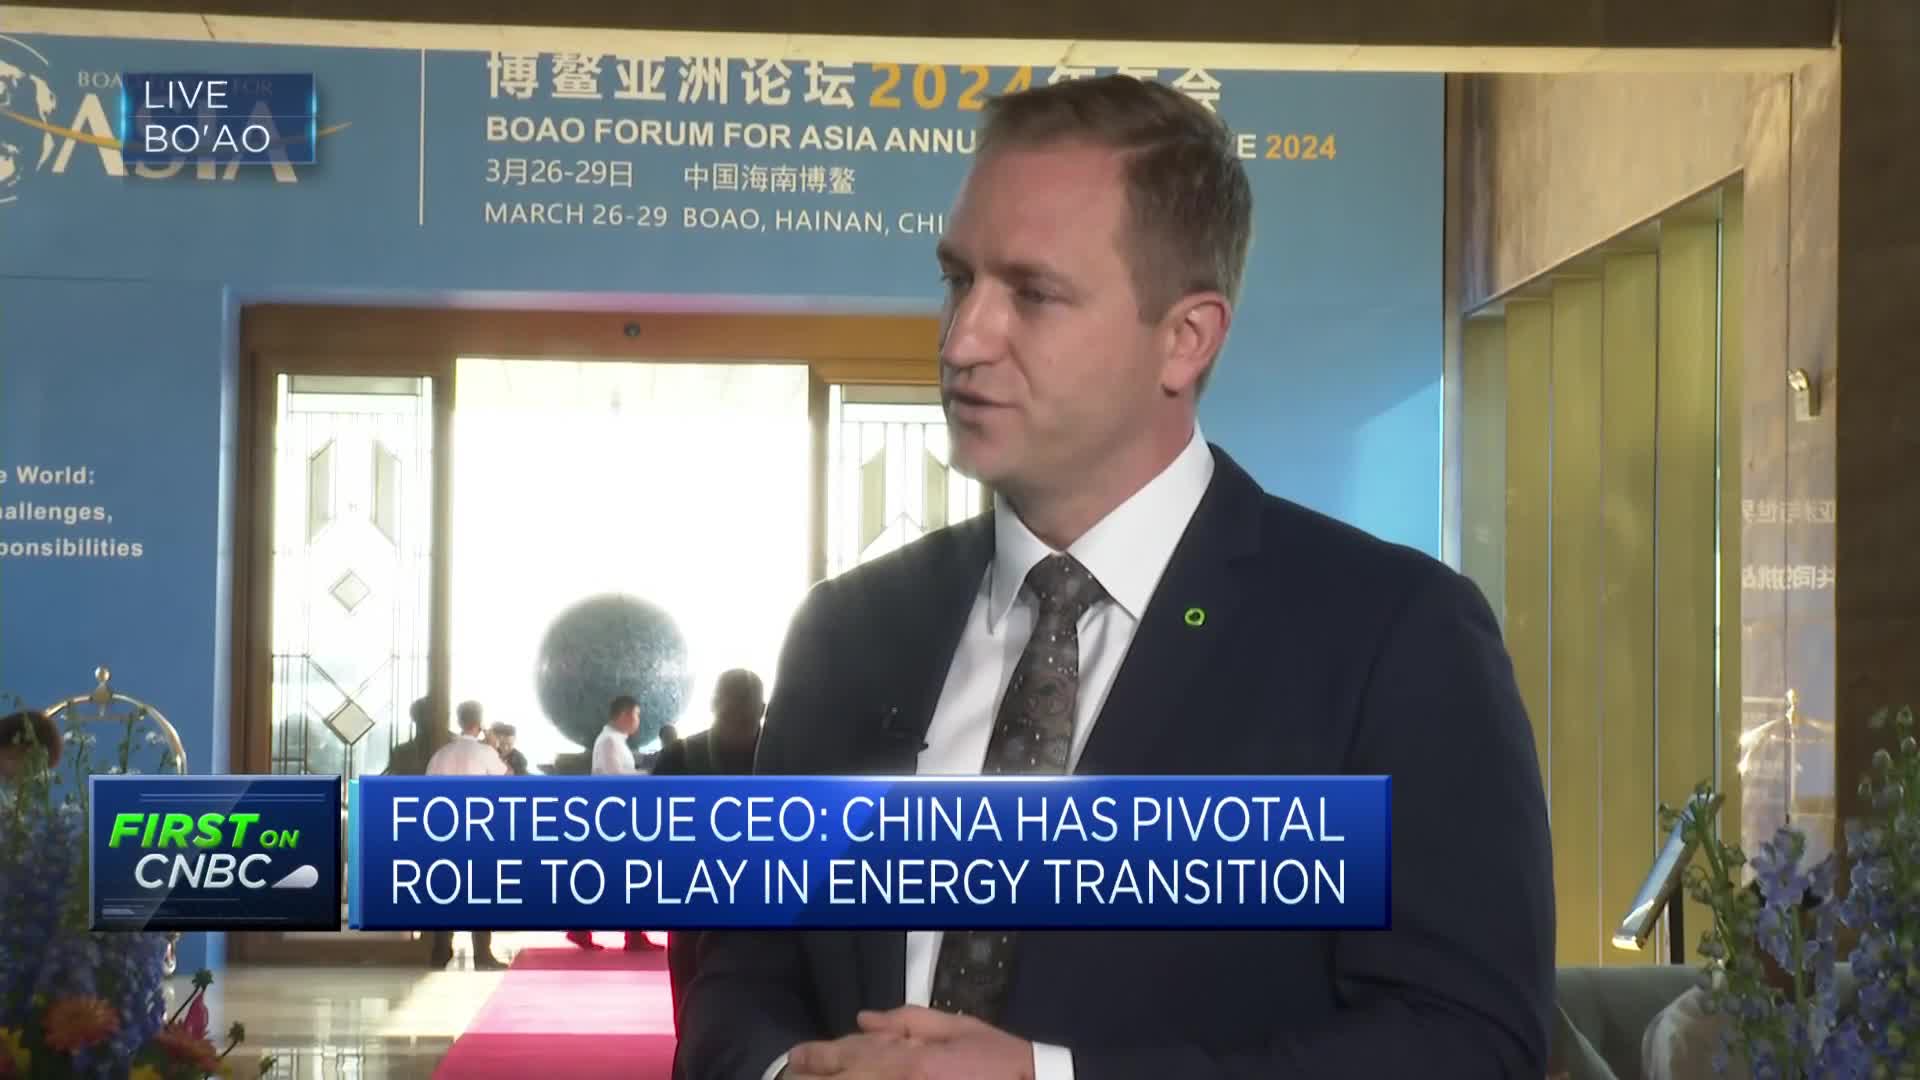 Outlook for China's iron ore market remains strong amid energy transition, says Fortescue Metals CEO